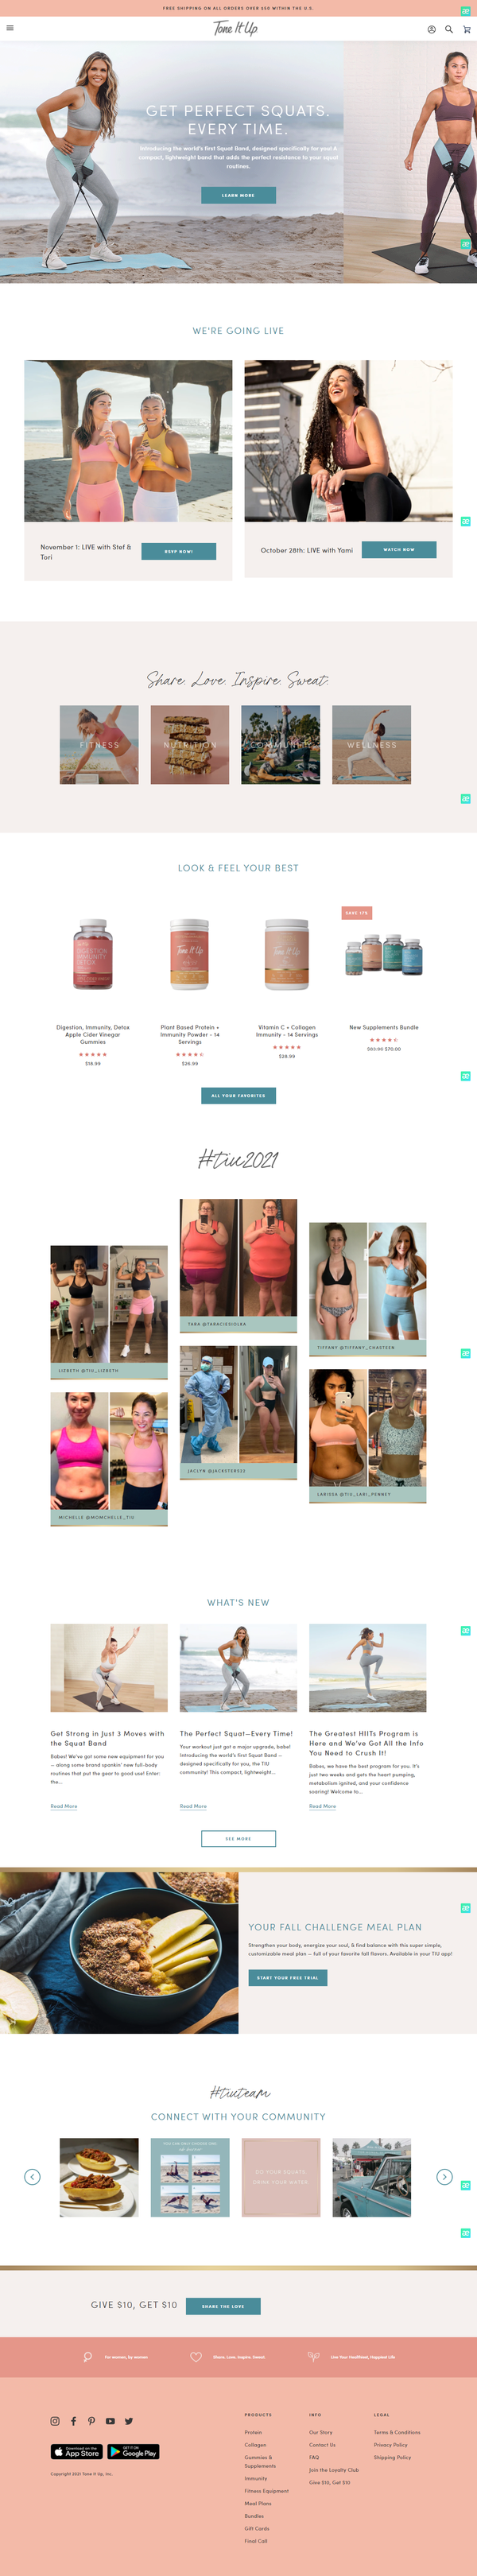 3 - Tone It Up - For Women, By Women - Fitness Products & Workout Progra_ - my.toneitup.com.png